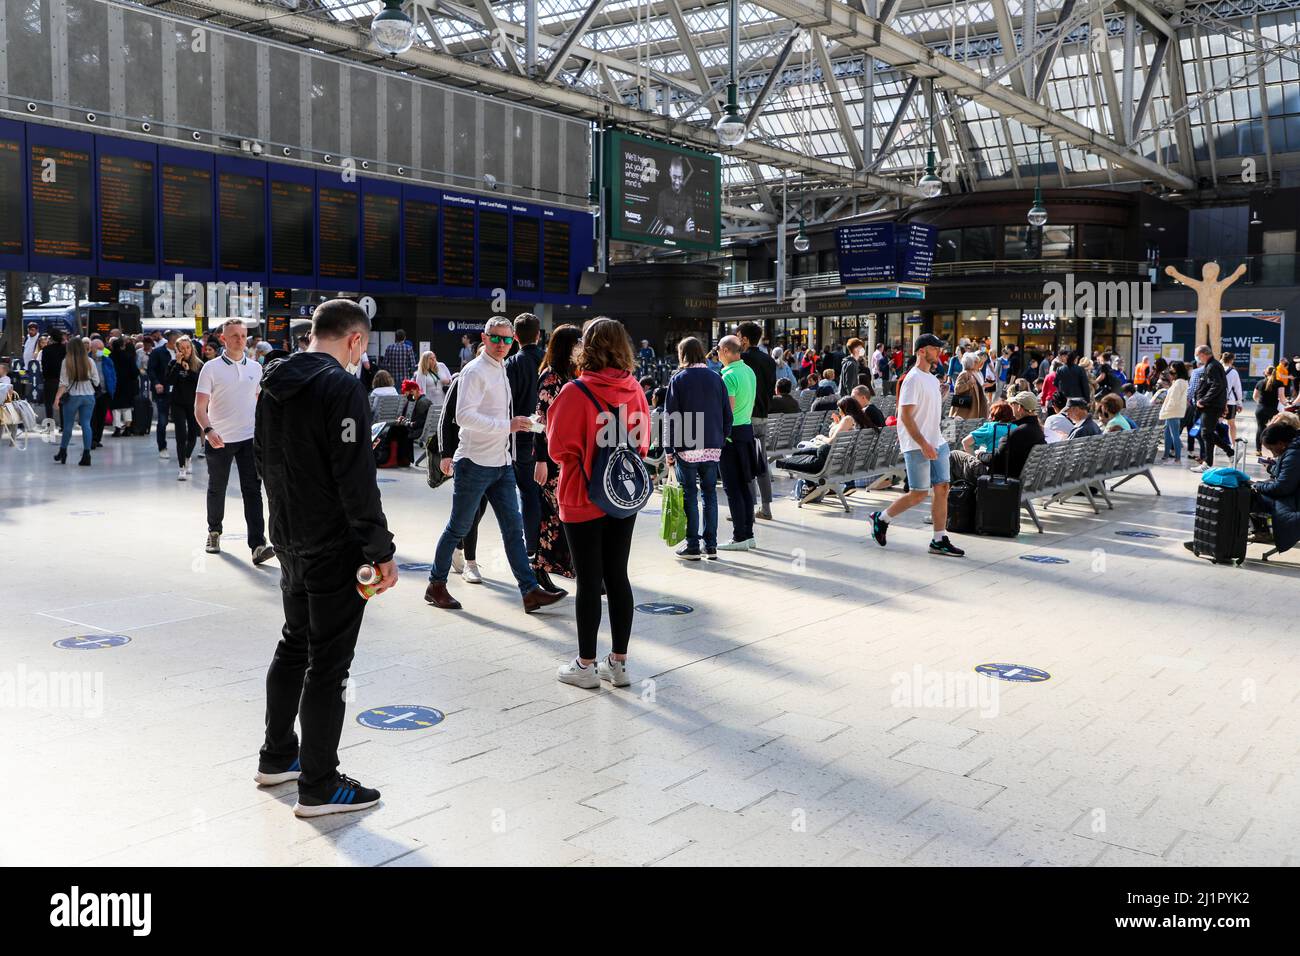 Passengers waiting at the concourse of Glasgow Central railway station, Glasgow, Scotland, UK Stock Photo